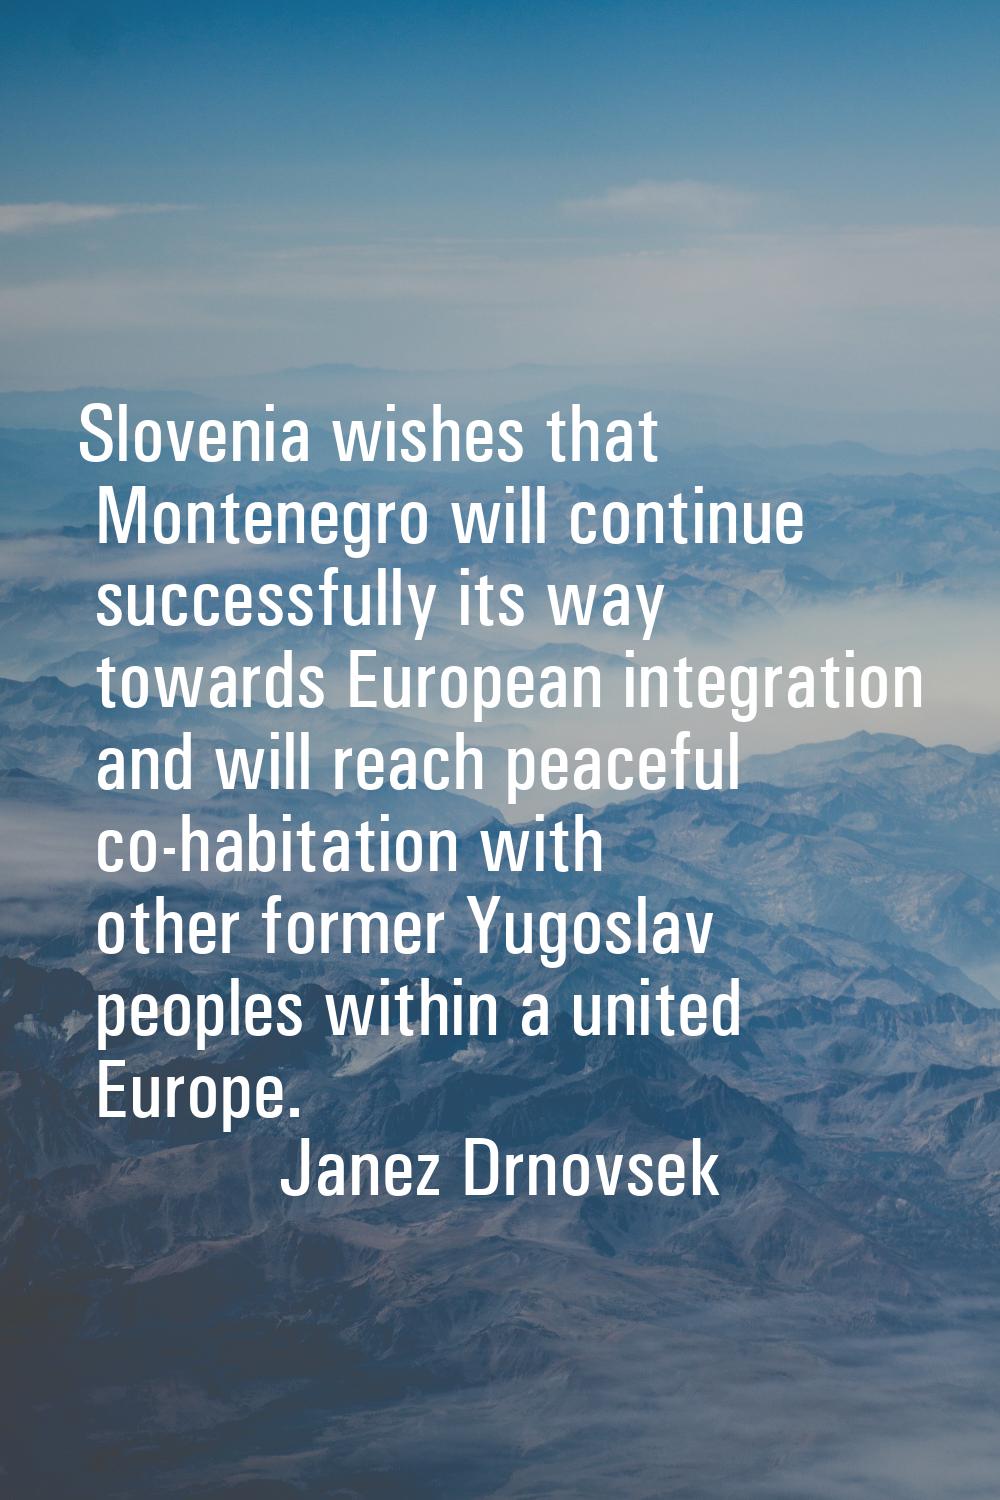 Slovenia wishes that Montenegro will continue successfully its way towards European integration and